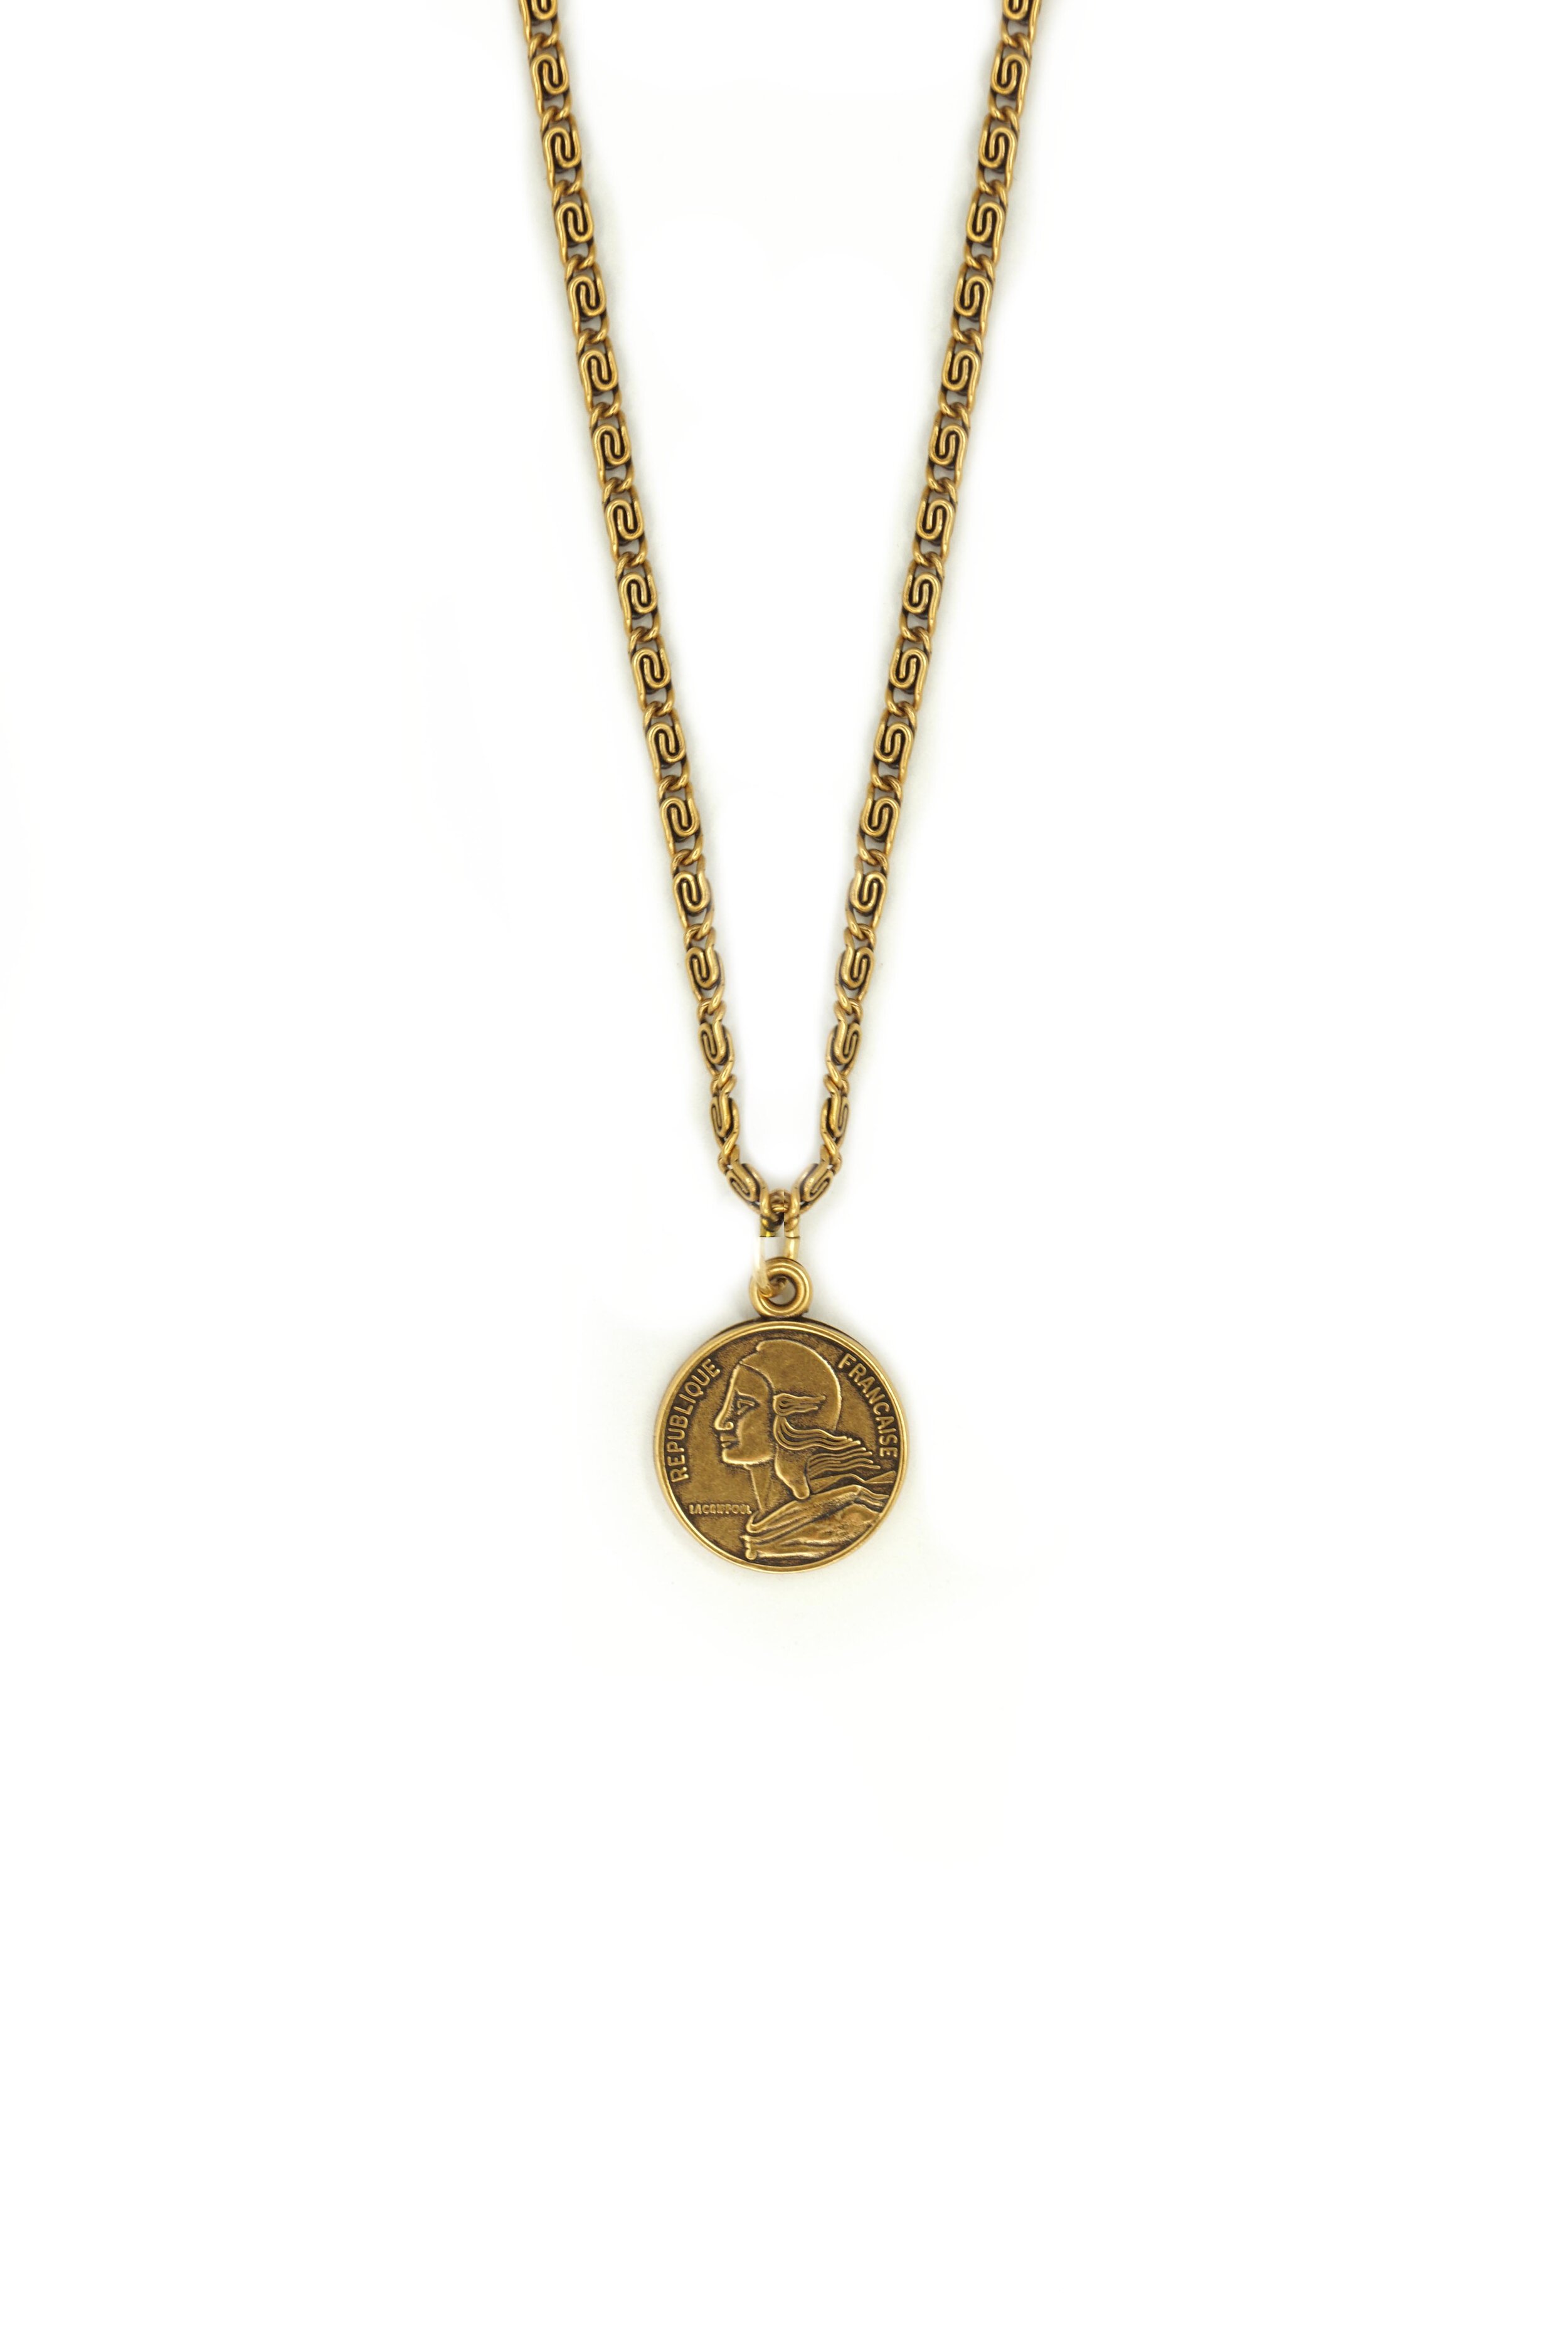 Artist's Classic 1903-1905 French Coin Jewelry Pendant on a 28" .925 Wavy Chain 